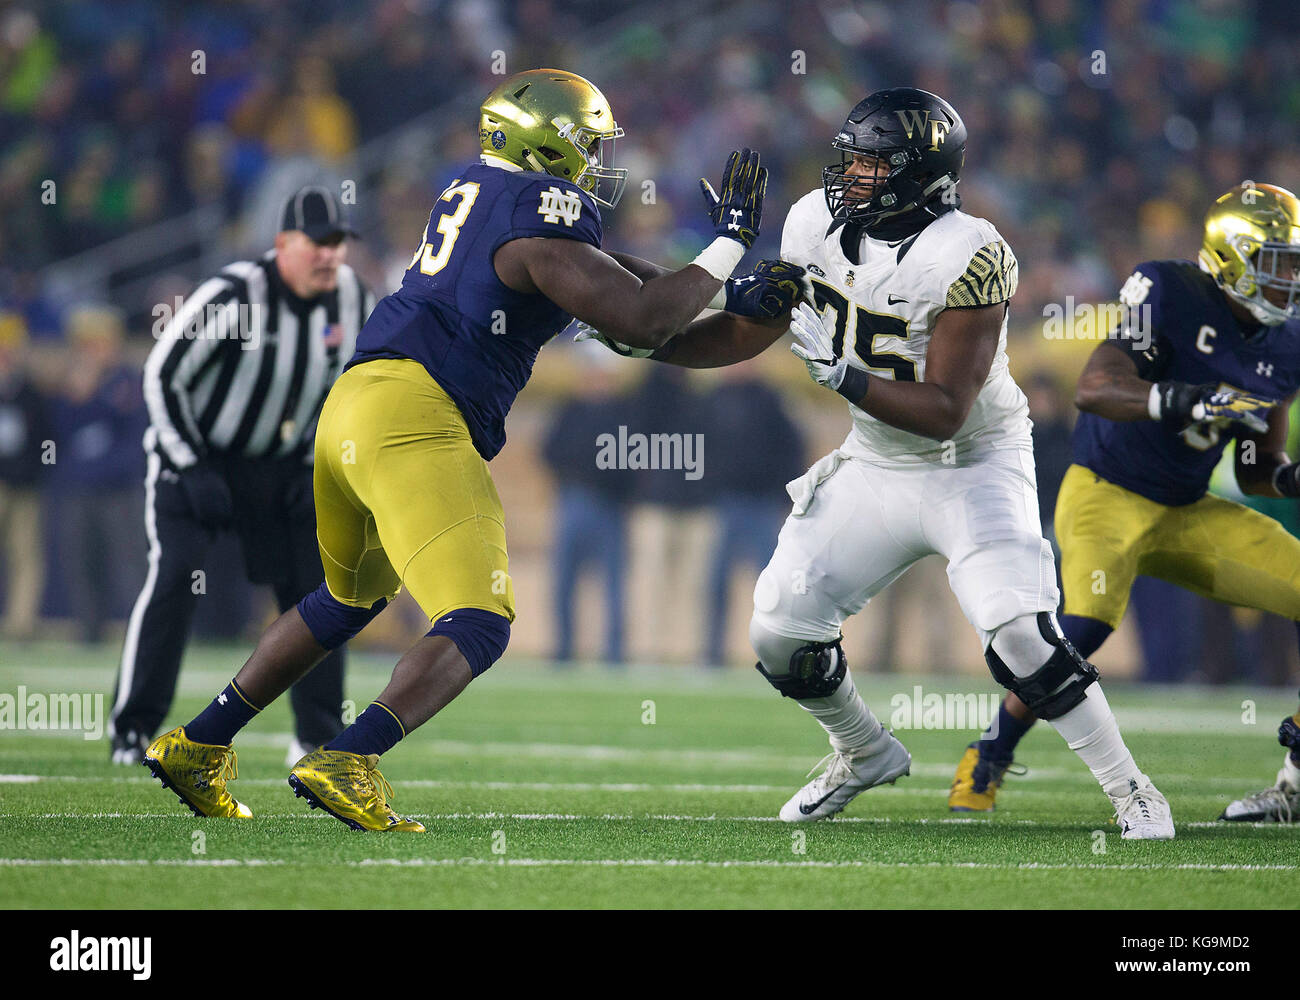 November 04, 2017: Notre Dame defensive lineman Jay Hayes (93) and Wake Forest offensive lineman Justin Herron (75) battle at the line of scrimmage during NCAA football game action between the Wake Forest Demon Deacons and the Notre Dame Fighting Irish at Notre Dame Stadium in South Bend, Indiana. Notre Dame defeated Wake Forest 48-37. John Mersits/CSM Stock Photo